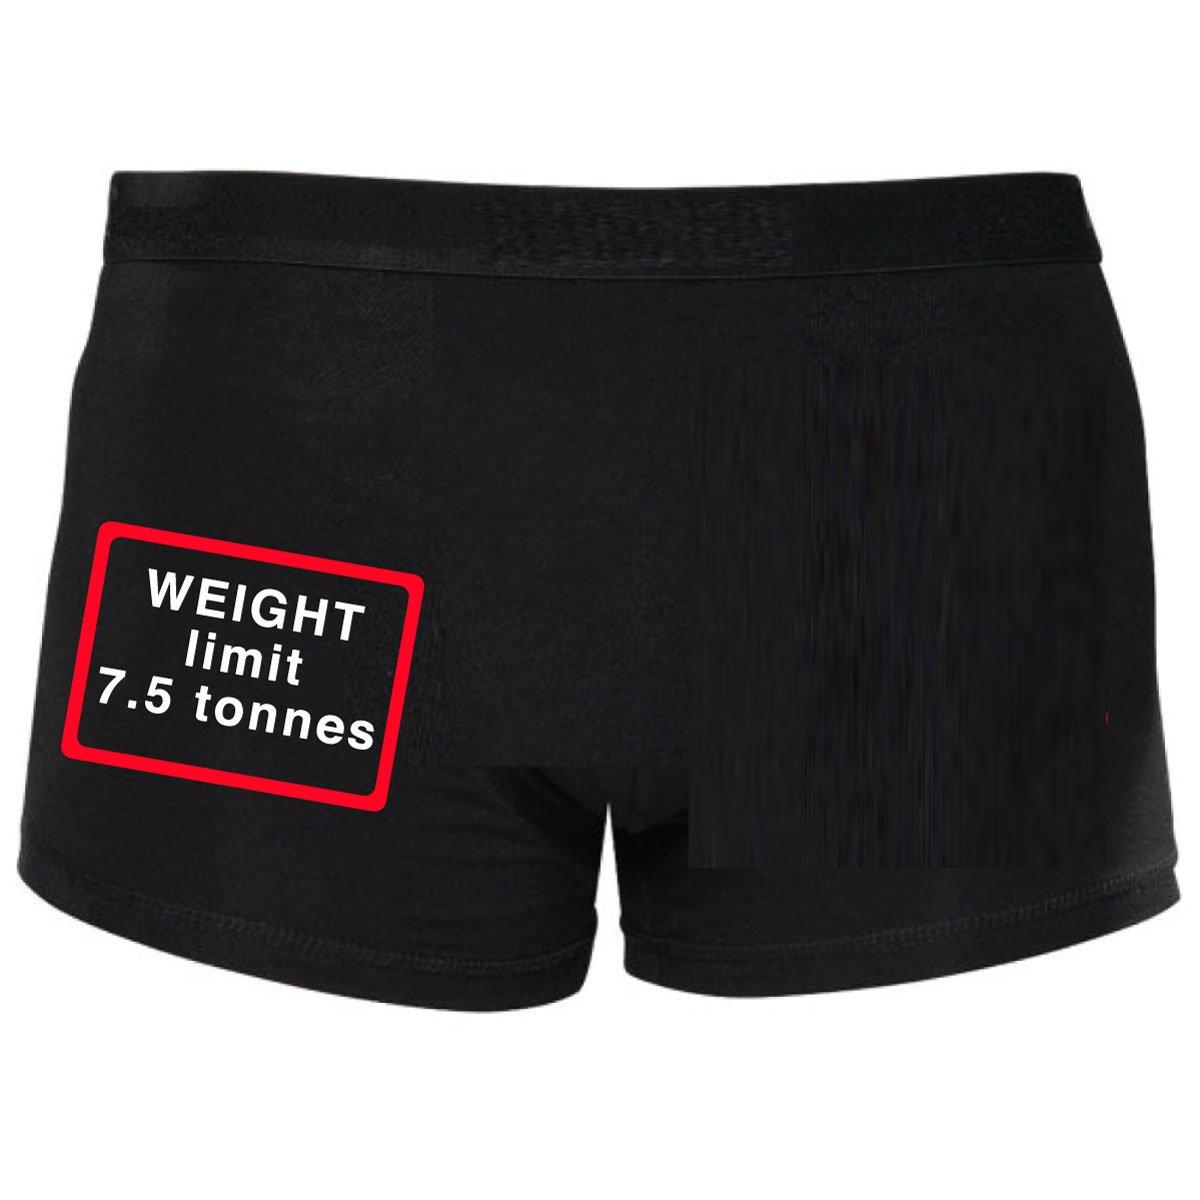 Funny Boxers Weight Limit 7.5 Tonnes Shorty Boxers